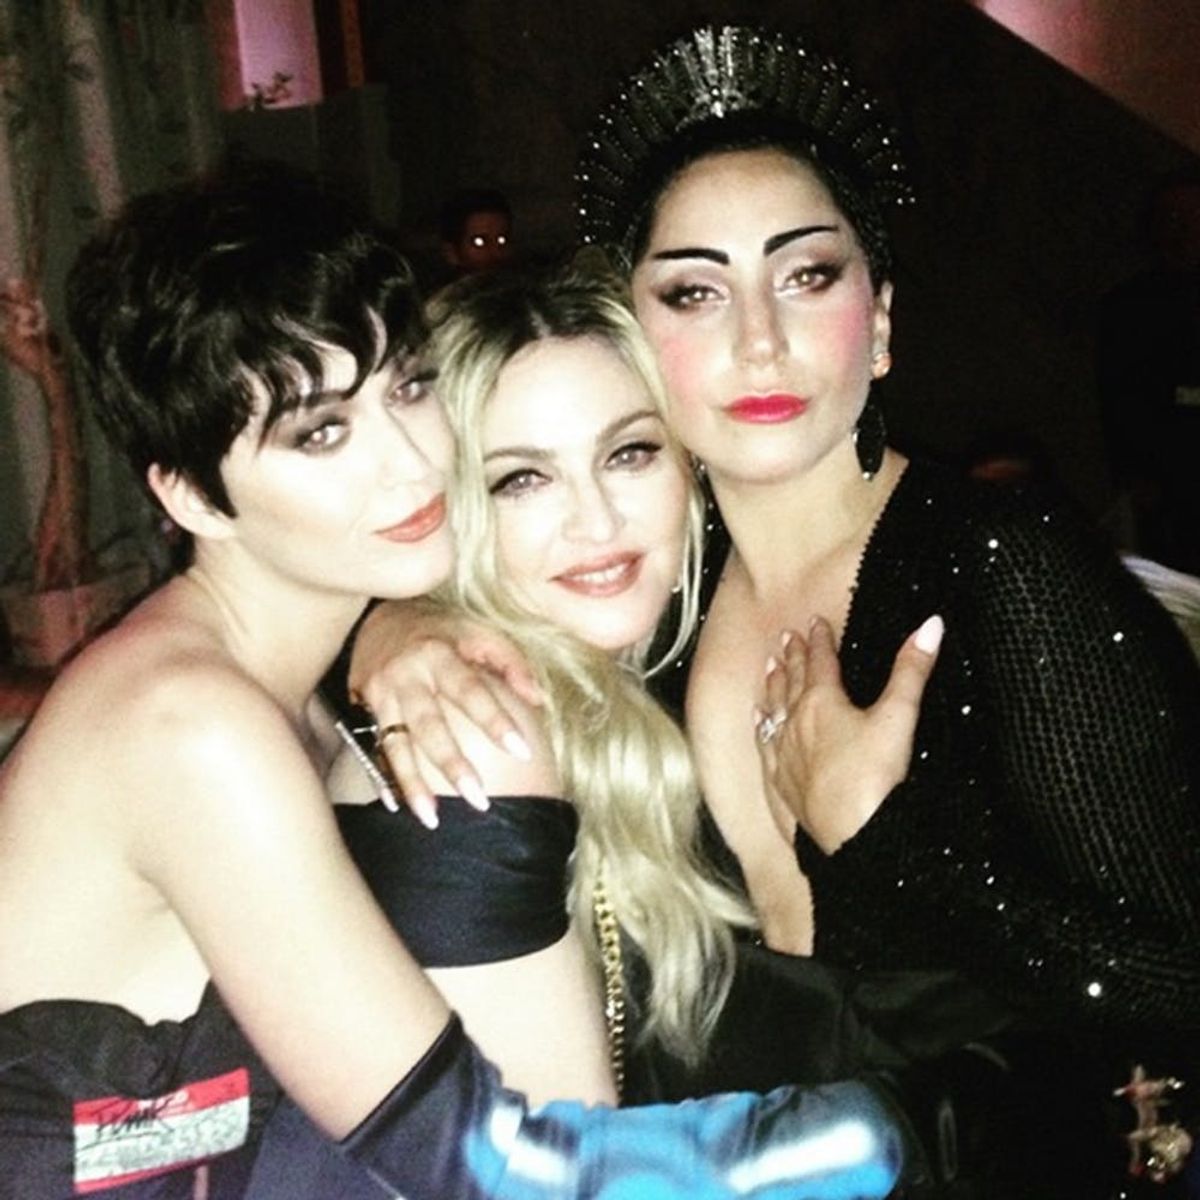 21 Behind-the-Scenes Instagrams You Didn’t See from the Met Gala